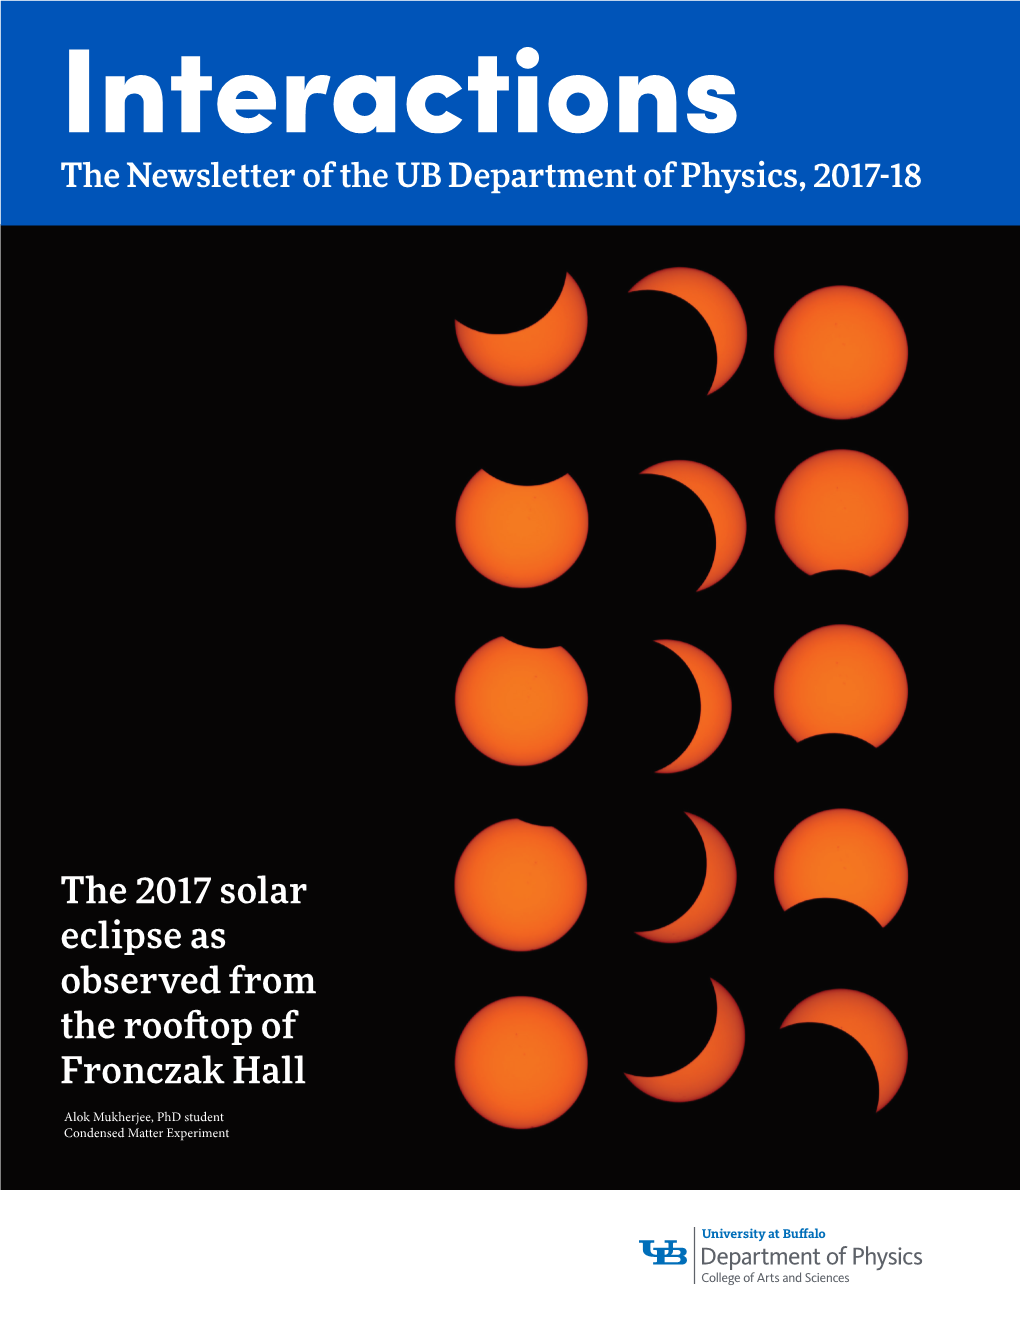 The 2017 Solar Eclipse As Observed from the Rooftop of Fronczak Hall